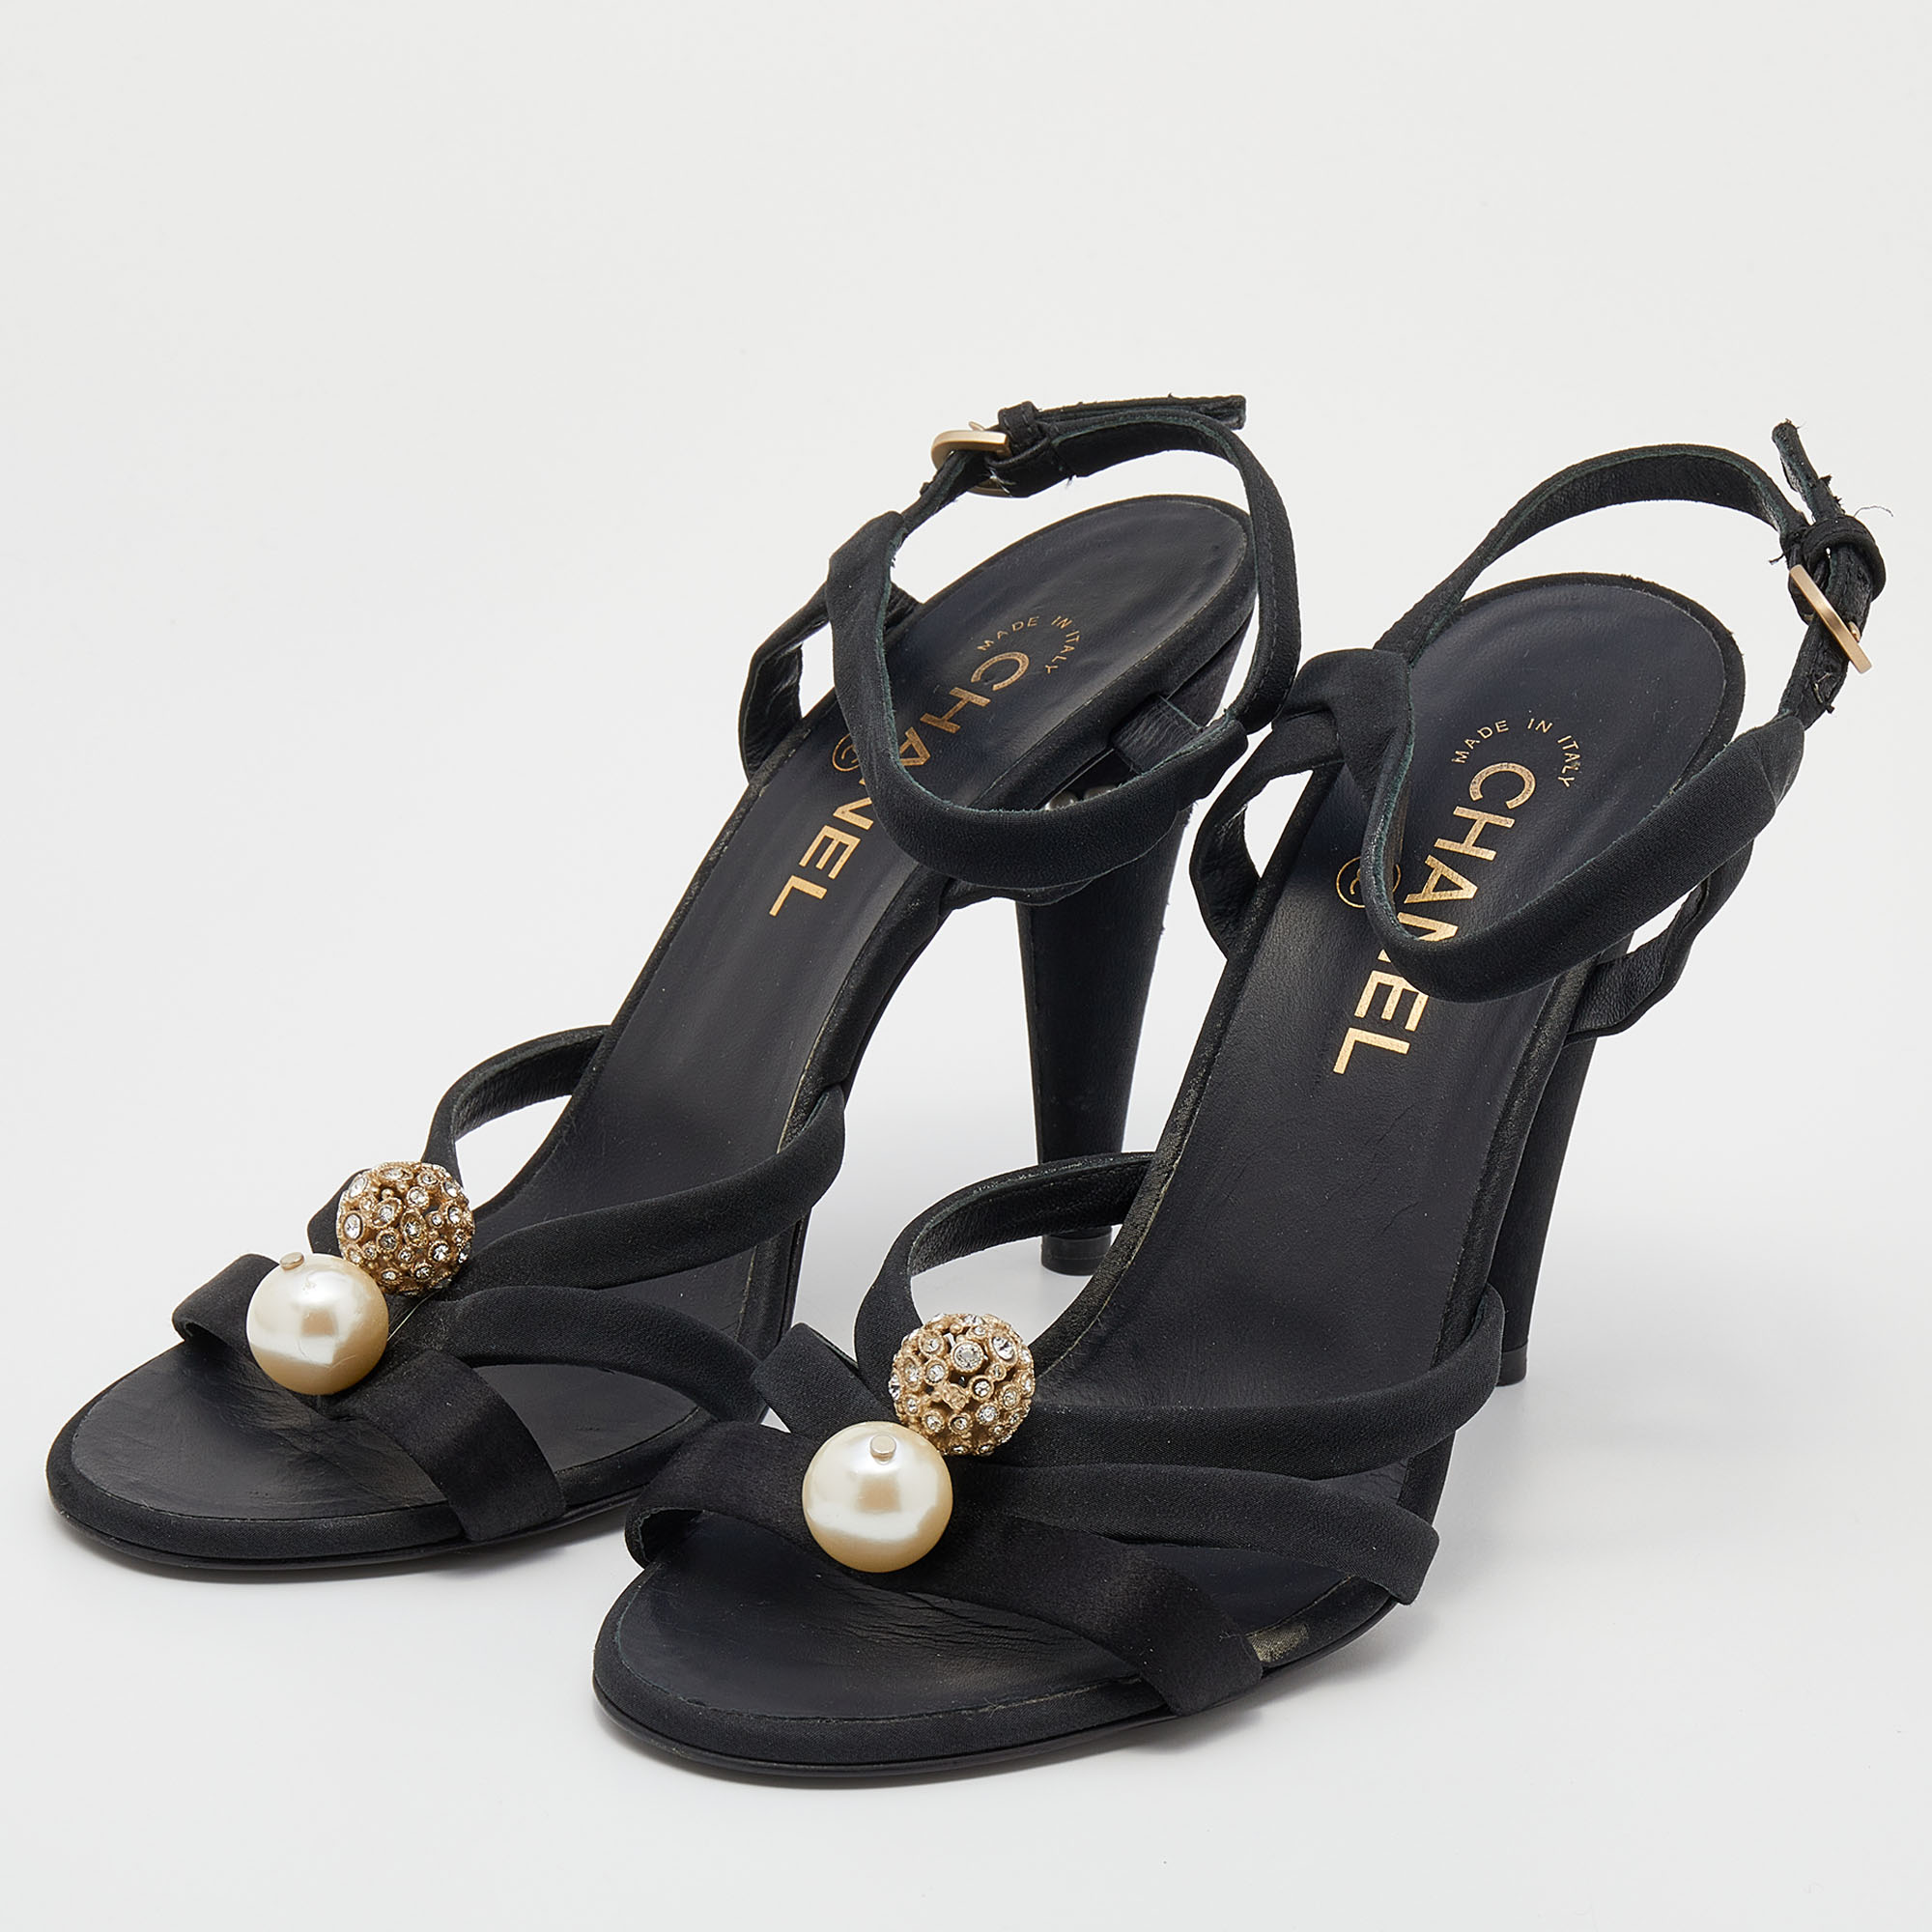 

Chanel Black Satin And Fabric Embellished Strappy Sandals Size